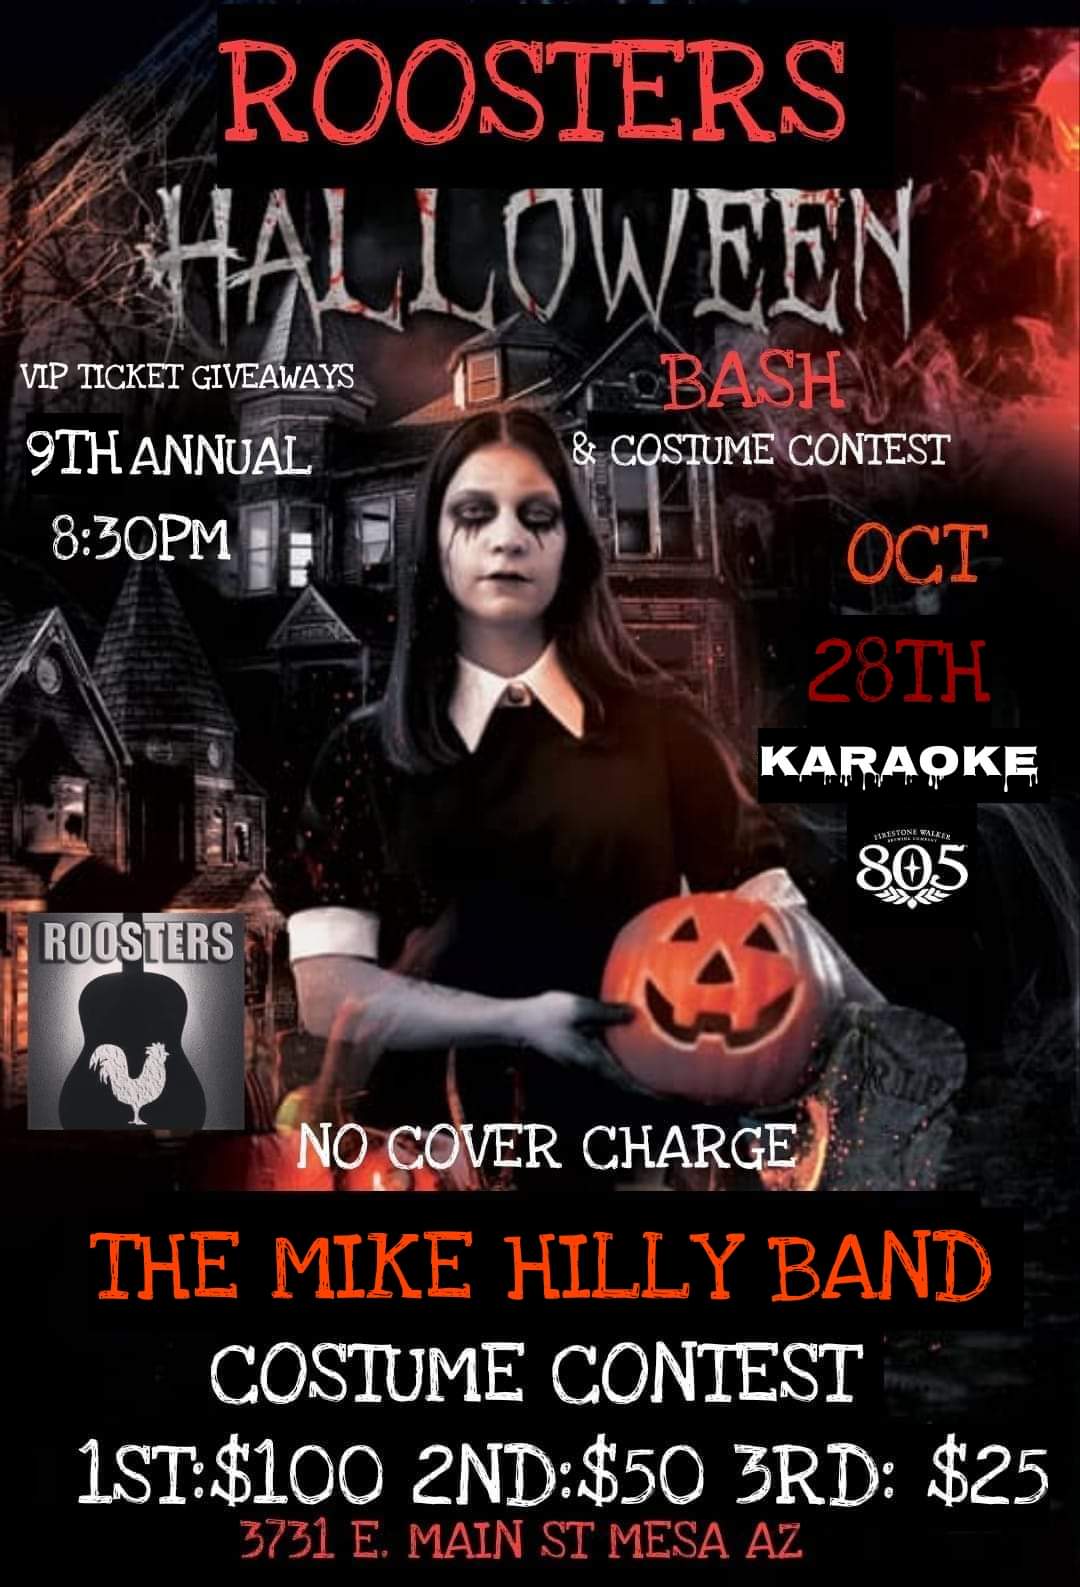 Roosters Halloween Bash – The Mike Hilly Band Live